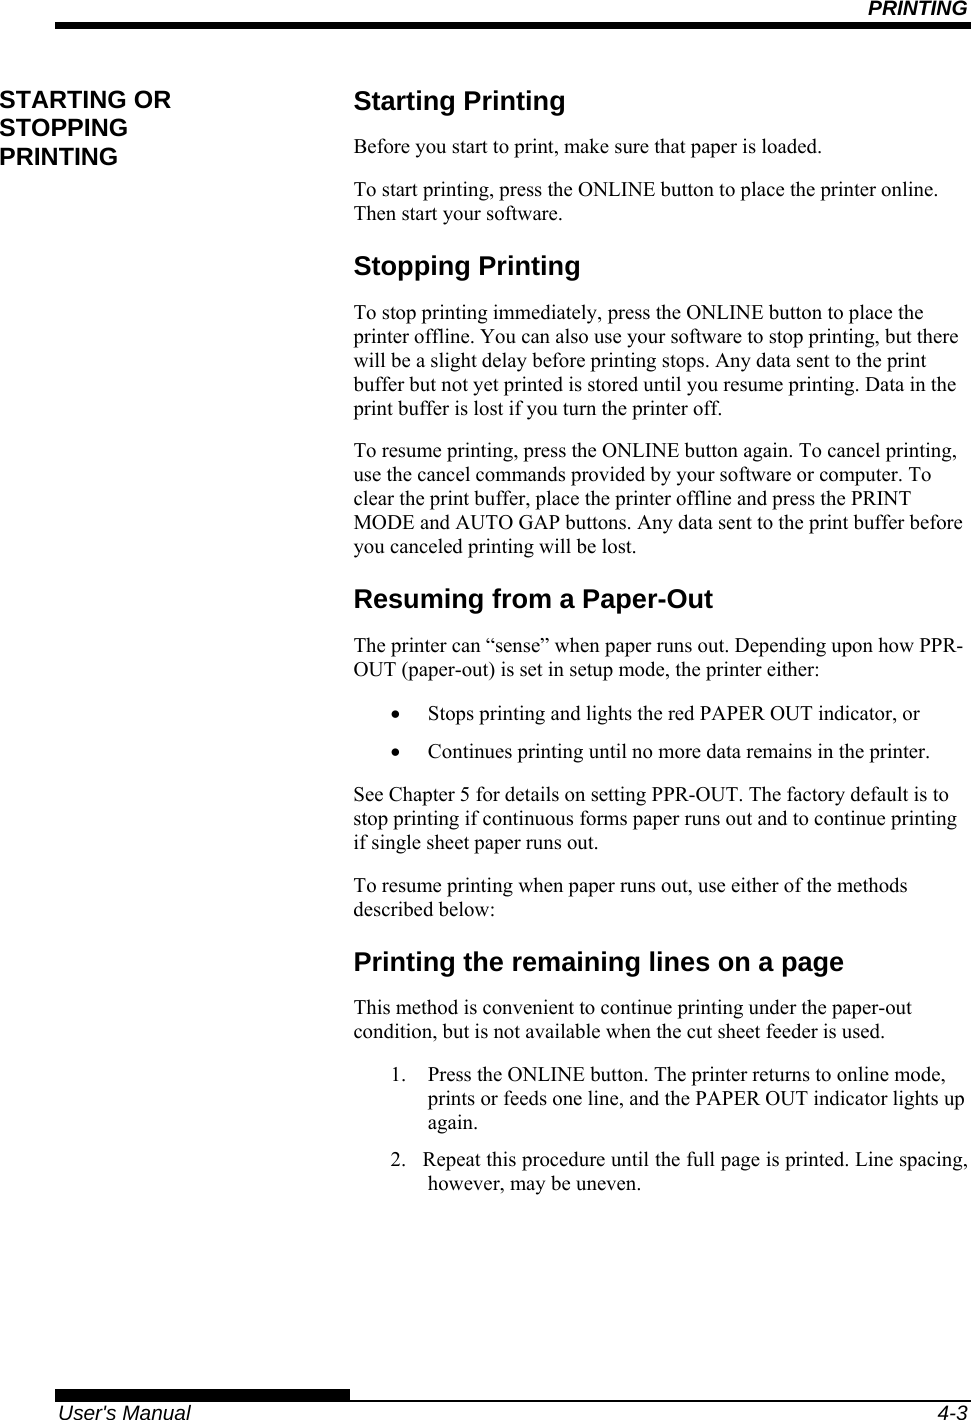 PRINTING   User&apos;s Manual  4-3 Starting Printing Before you start to print, make sure that paper is loaded. To start printing, press the ONLINE button to place the printer online. Then start your software. Stopping Printing To stop printing immediately, press the ONLINE button to place the printer offline. You can also use your software to stop printing, but there will be a slight delay before printing stops. Any data sent to the print buffer but not yet printed is stored until you resume printing. Data in the print buffer is lost if you turn the printer off. To resume printing, press the ONLINE button again. To cancel printing, use the cancel commands provided by your software or computer. To clear the print buffer, place the printer offline and press the PRINT MODE and AUTO GAP buttons. Any data sent to the print buffer before you canceled printing will be lost. Resuming from a Paper-Out The printer can “sense” when paper runs out. Depending upon how PPR-OUT (paper-out) is set in setup mode, the printer either: •  Stops printing and lights the red PAPER OUT indicator, or •  Continues printing until no more data remains in the printer. See Chapter 5 for details on setting PPR-OUT. The factory default is to stop printing if continuous forms paper runs out and to continue printing if single sheet paper runs out. To resume printing when paper runs out, use either of the methods described below: Printing the remaining lines on a page This method is convenient to continue printing under the paper-out condition, but is not available when the cut sheet feeder is used. 1.  Press the ONLINE button. The printer returns to online mode, prints or feeds one line, and the PAPER OUT indicator lights up again. 2.  Repeat this procedure until the full page is printed. Line spacing, however, may be uneven. STARTING OR STOPPING PRINTING 